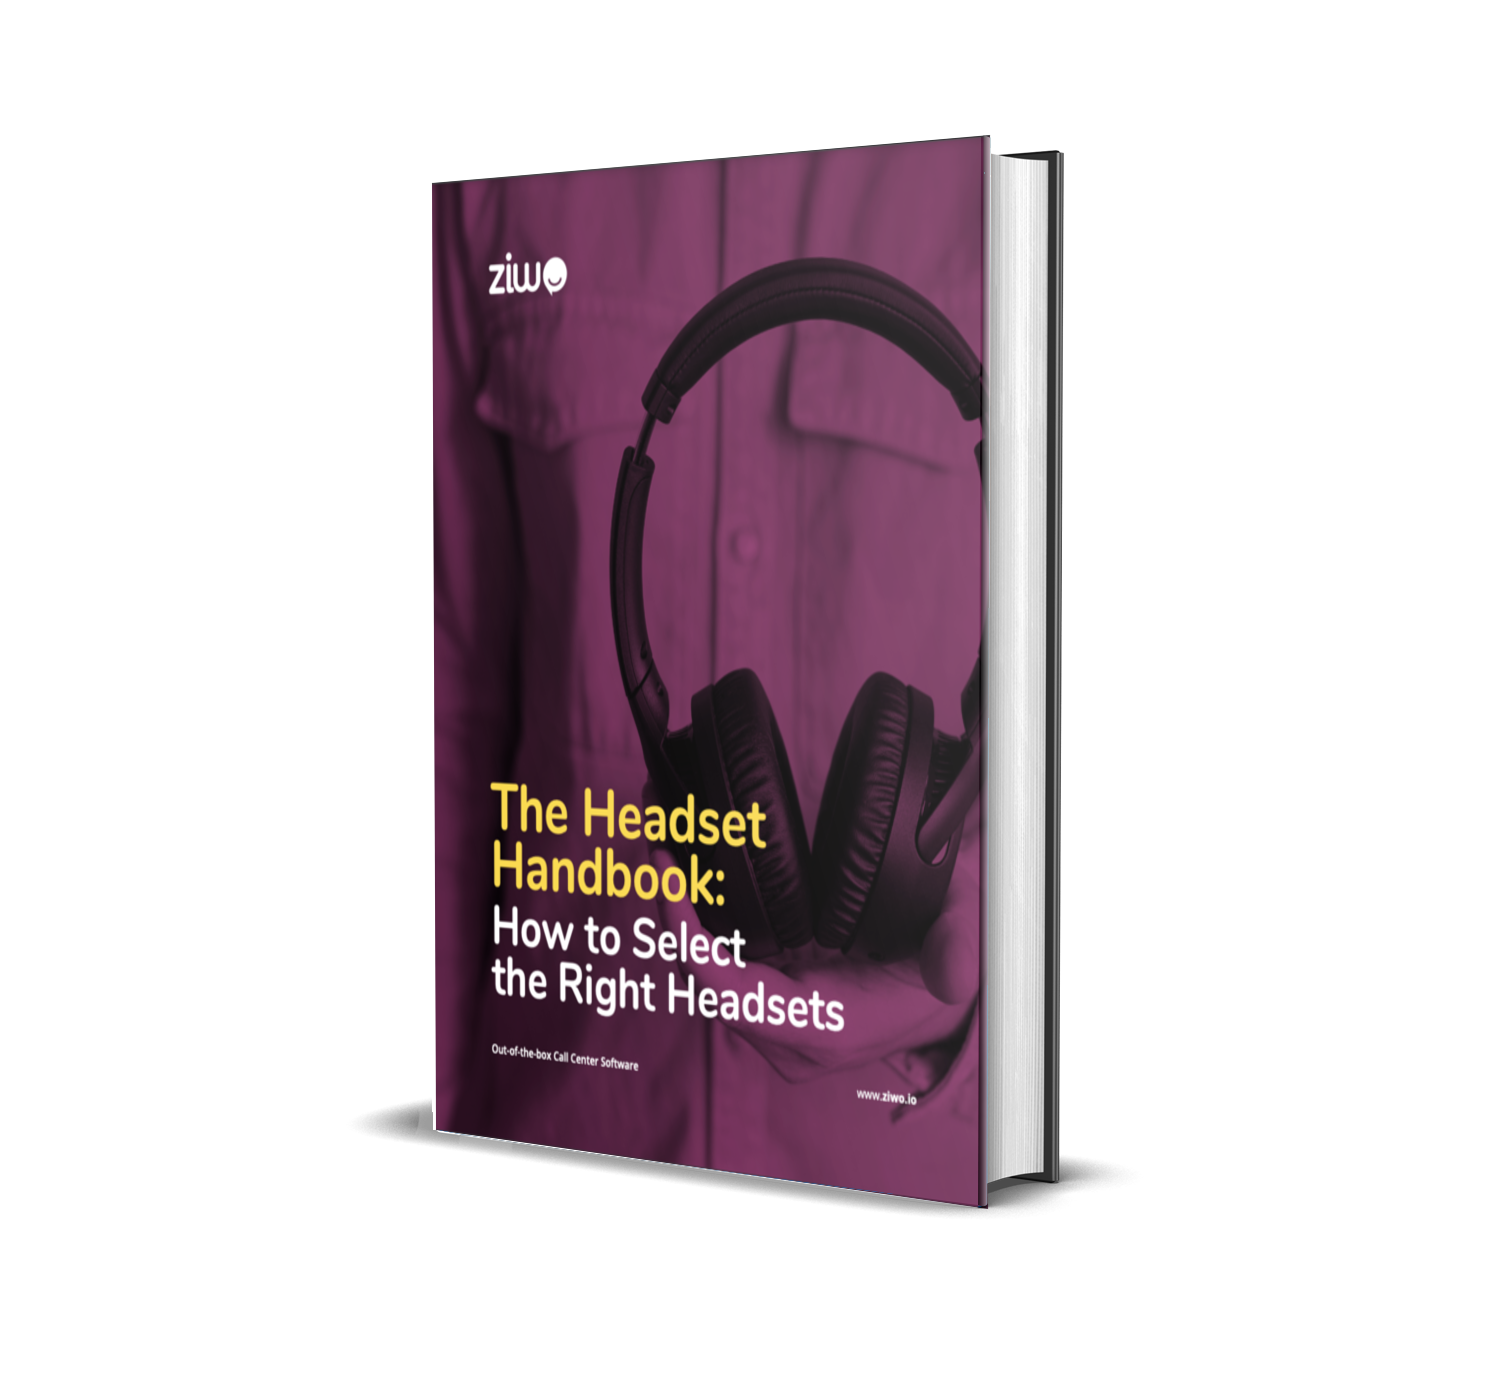 A book with a title "The Headset Handbook: How to Select the Right Headset"